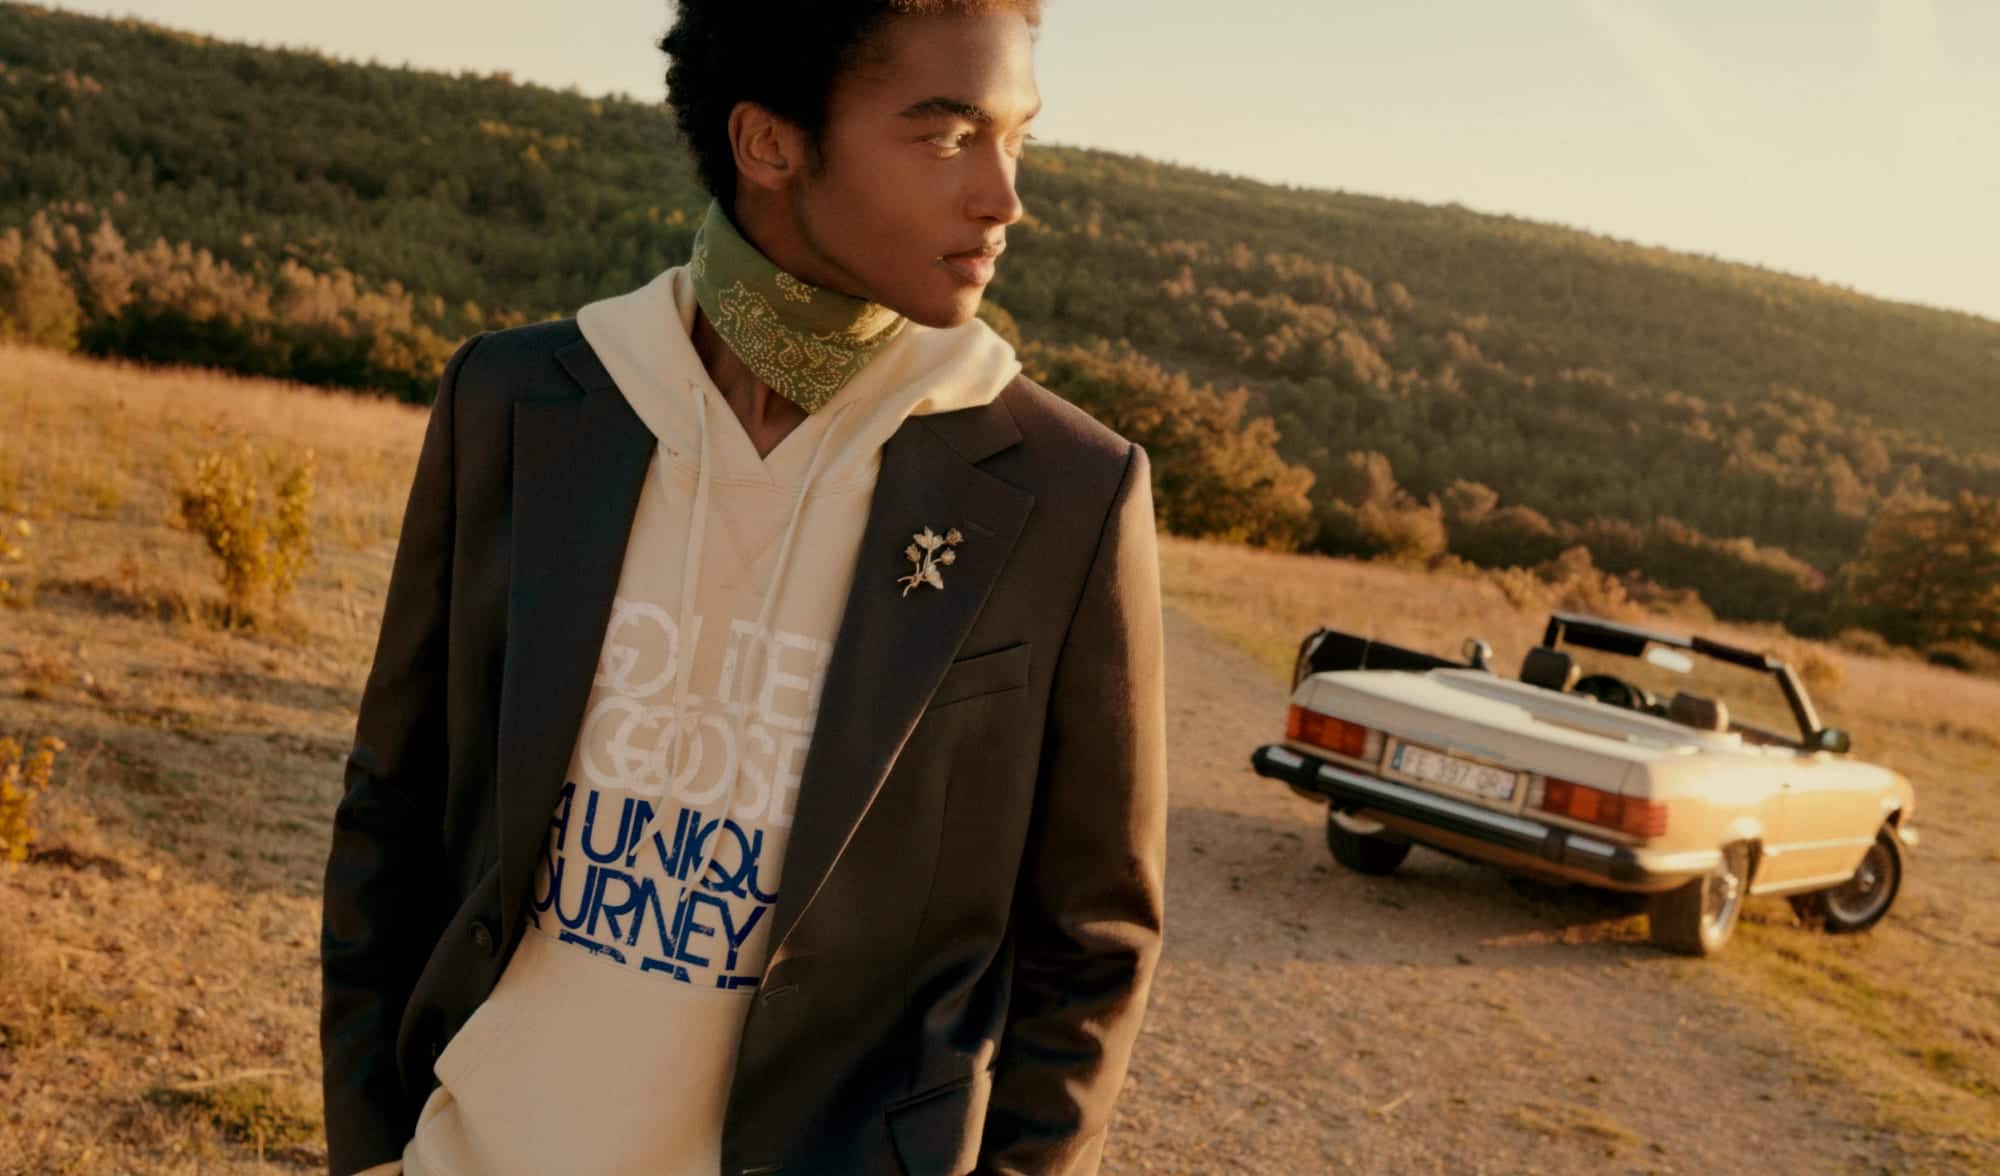 boy-in-front-of-his-car-in-a-rural-landscape-wearing-a-Marzipan-colored-sweatshirt-with-writing-on-the-front